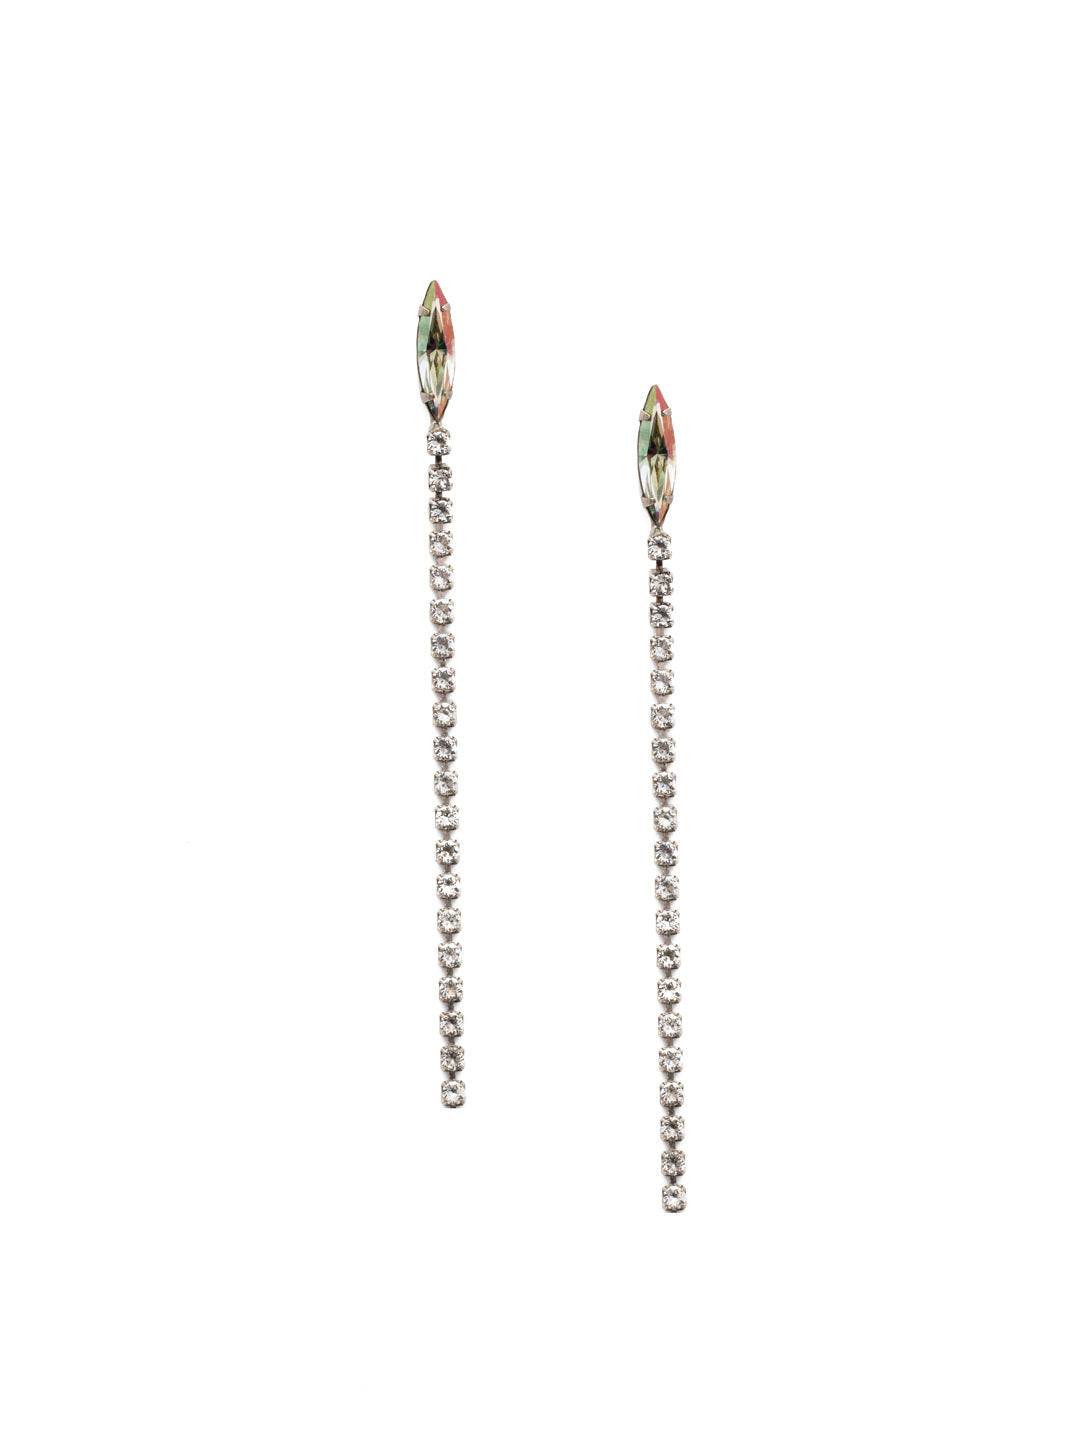 Annatalia Dangle Earrings - EEP10ASCRE - Fasten on the Annatalia Dangle Earring for drama. A dark navette stones drips with a row of round crystals for serious sparkle. From Sorrelli's Crystal Envy collection in our Antique Silver-tone finish.